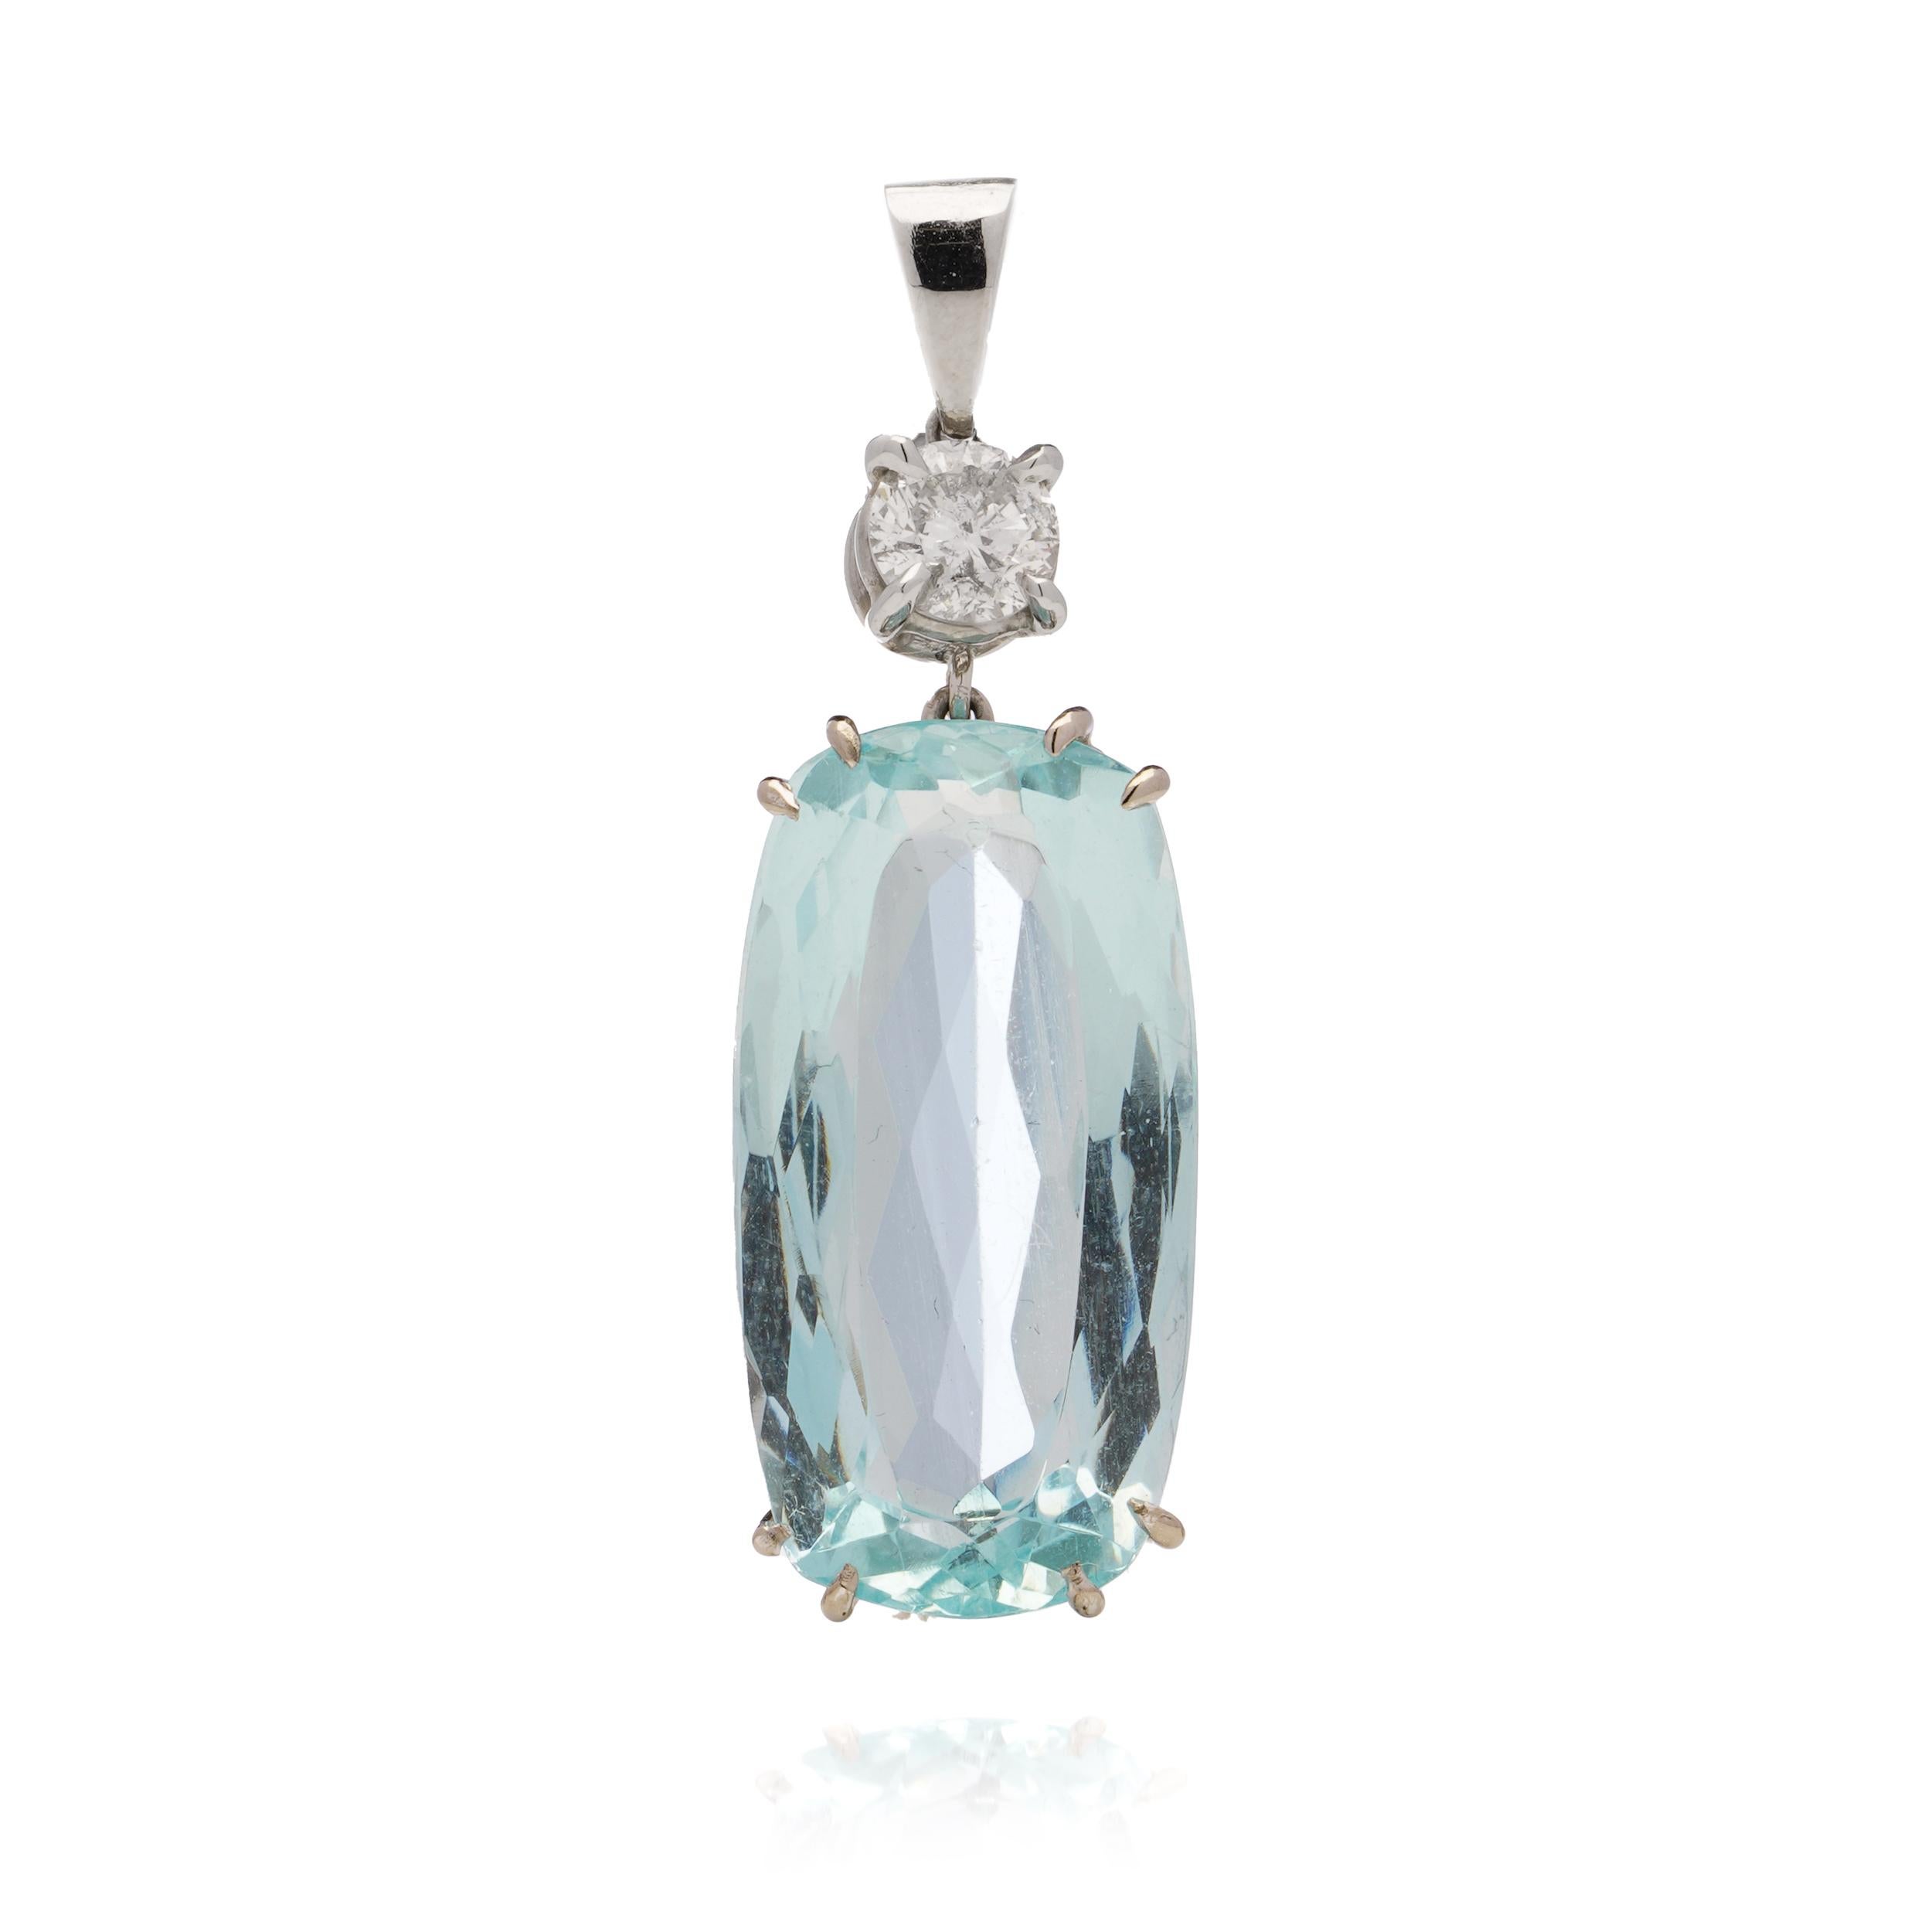 18kt white gold pendant with 8.68 cts Aquamarine and 0.50 carats of round brilliant diamond.
Made in 21st century
X - Ray positive for 18kt. white gold.

Dimensions -
Pendant Size -
3.5 x 1.1 x 0.6 cm
Weight: 5.00 grams

Aquamarine -
Cut - Elongated